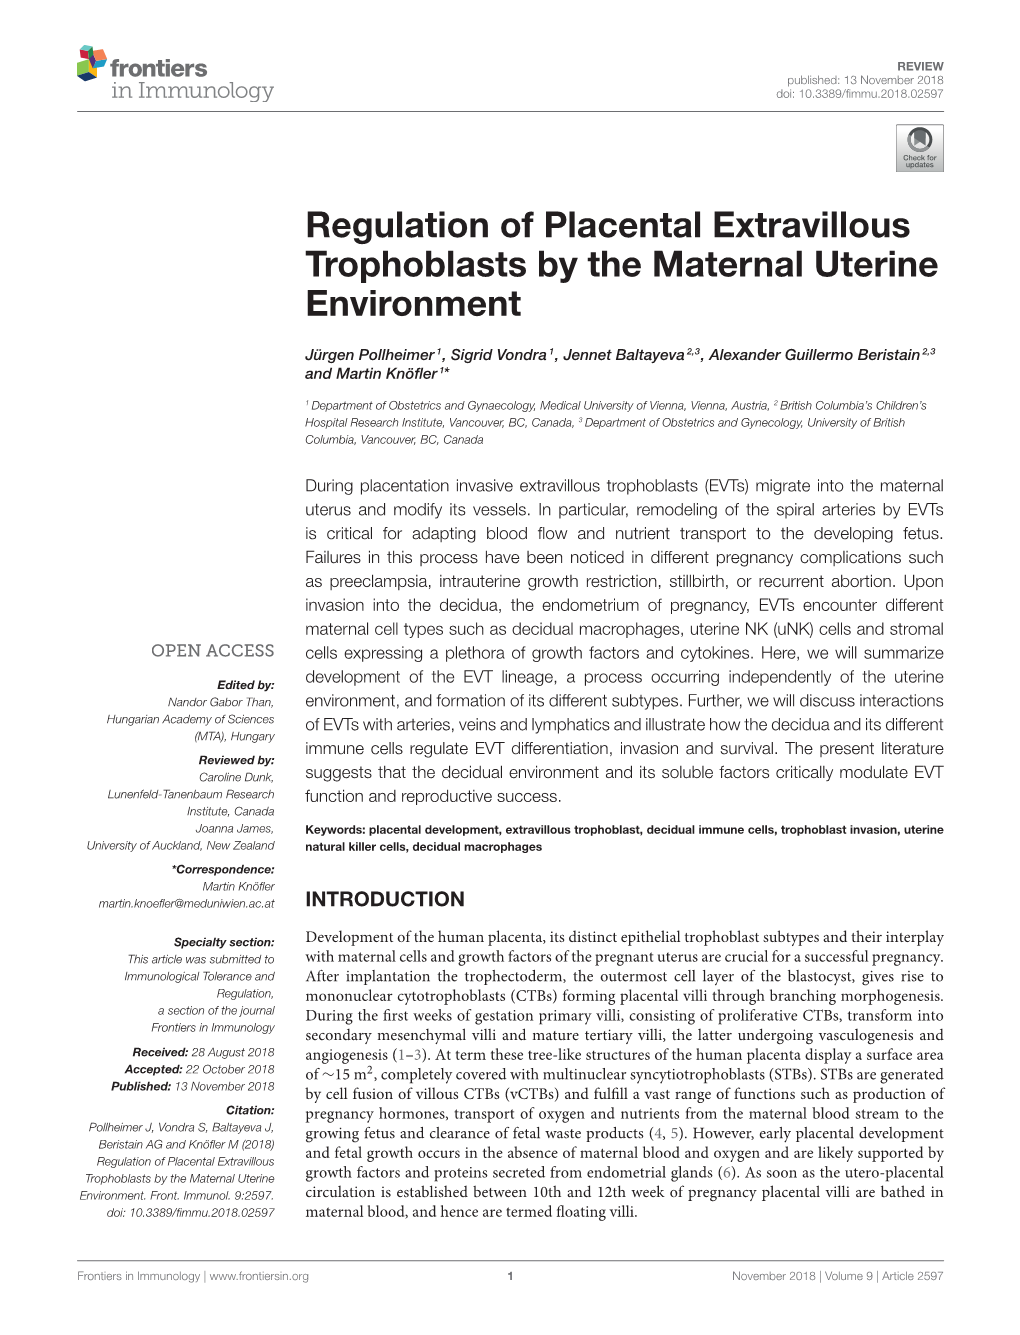 Regulation of Placental Extravillous Trophoblasts by the Maternal Uterine Environment